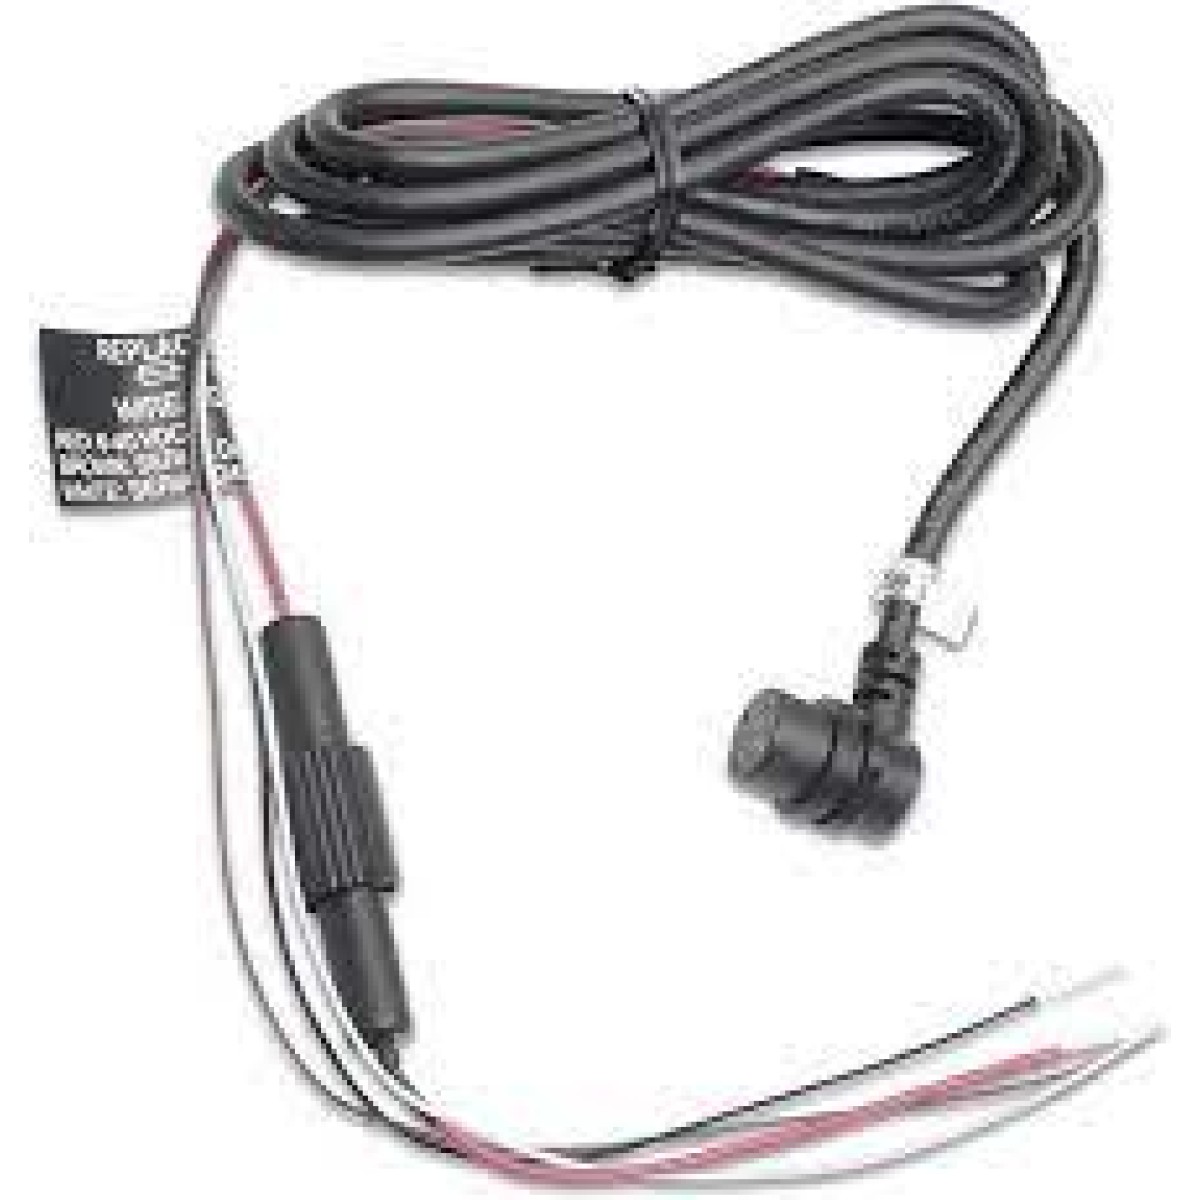 GARMIN Power/data cable (bare wires)